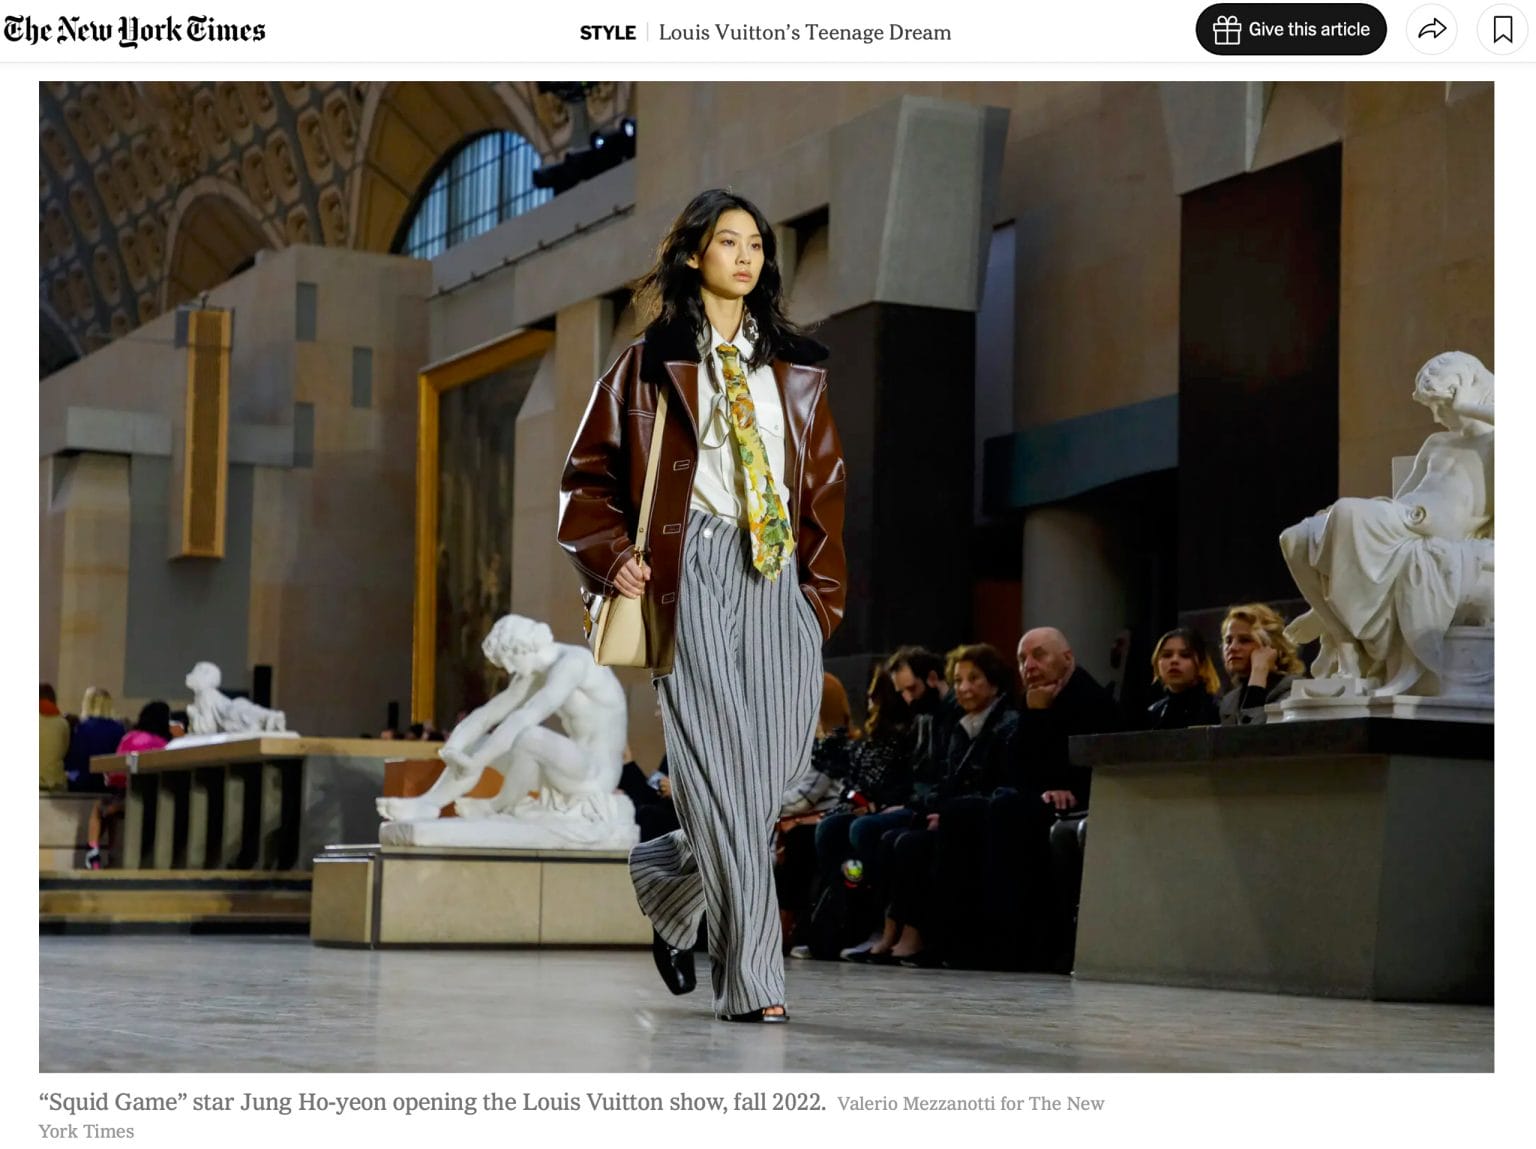 Jung Ho Yeon Opening The Louis Vuitton Fashion Show, Photo By Valerio Mezzanotti For The New York Times